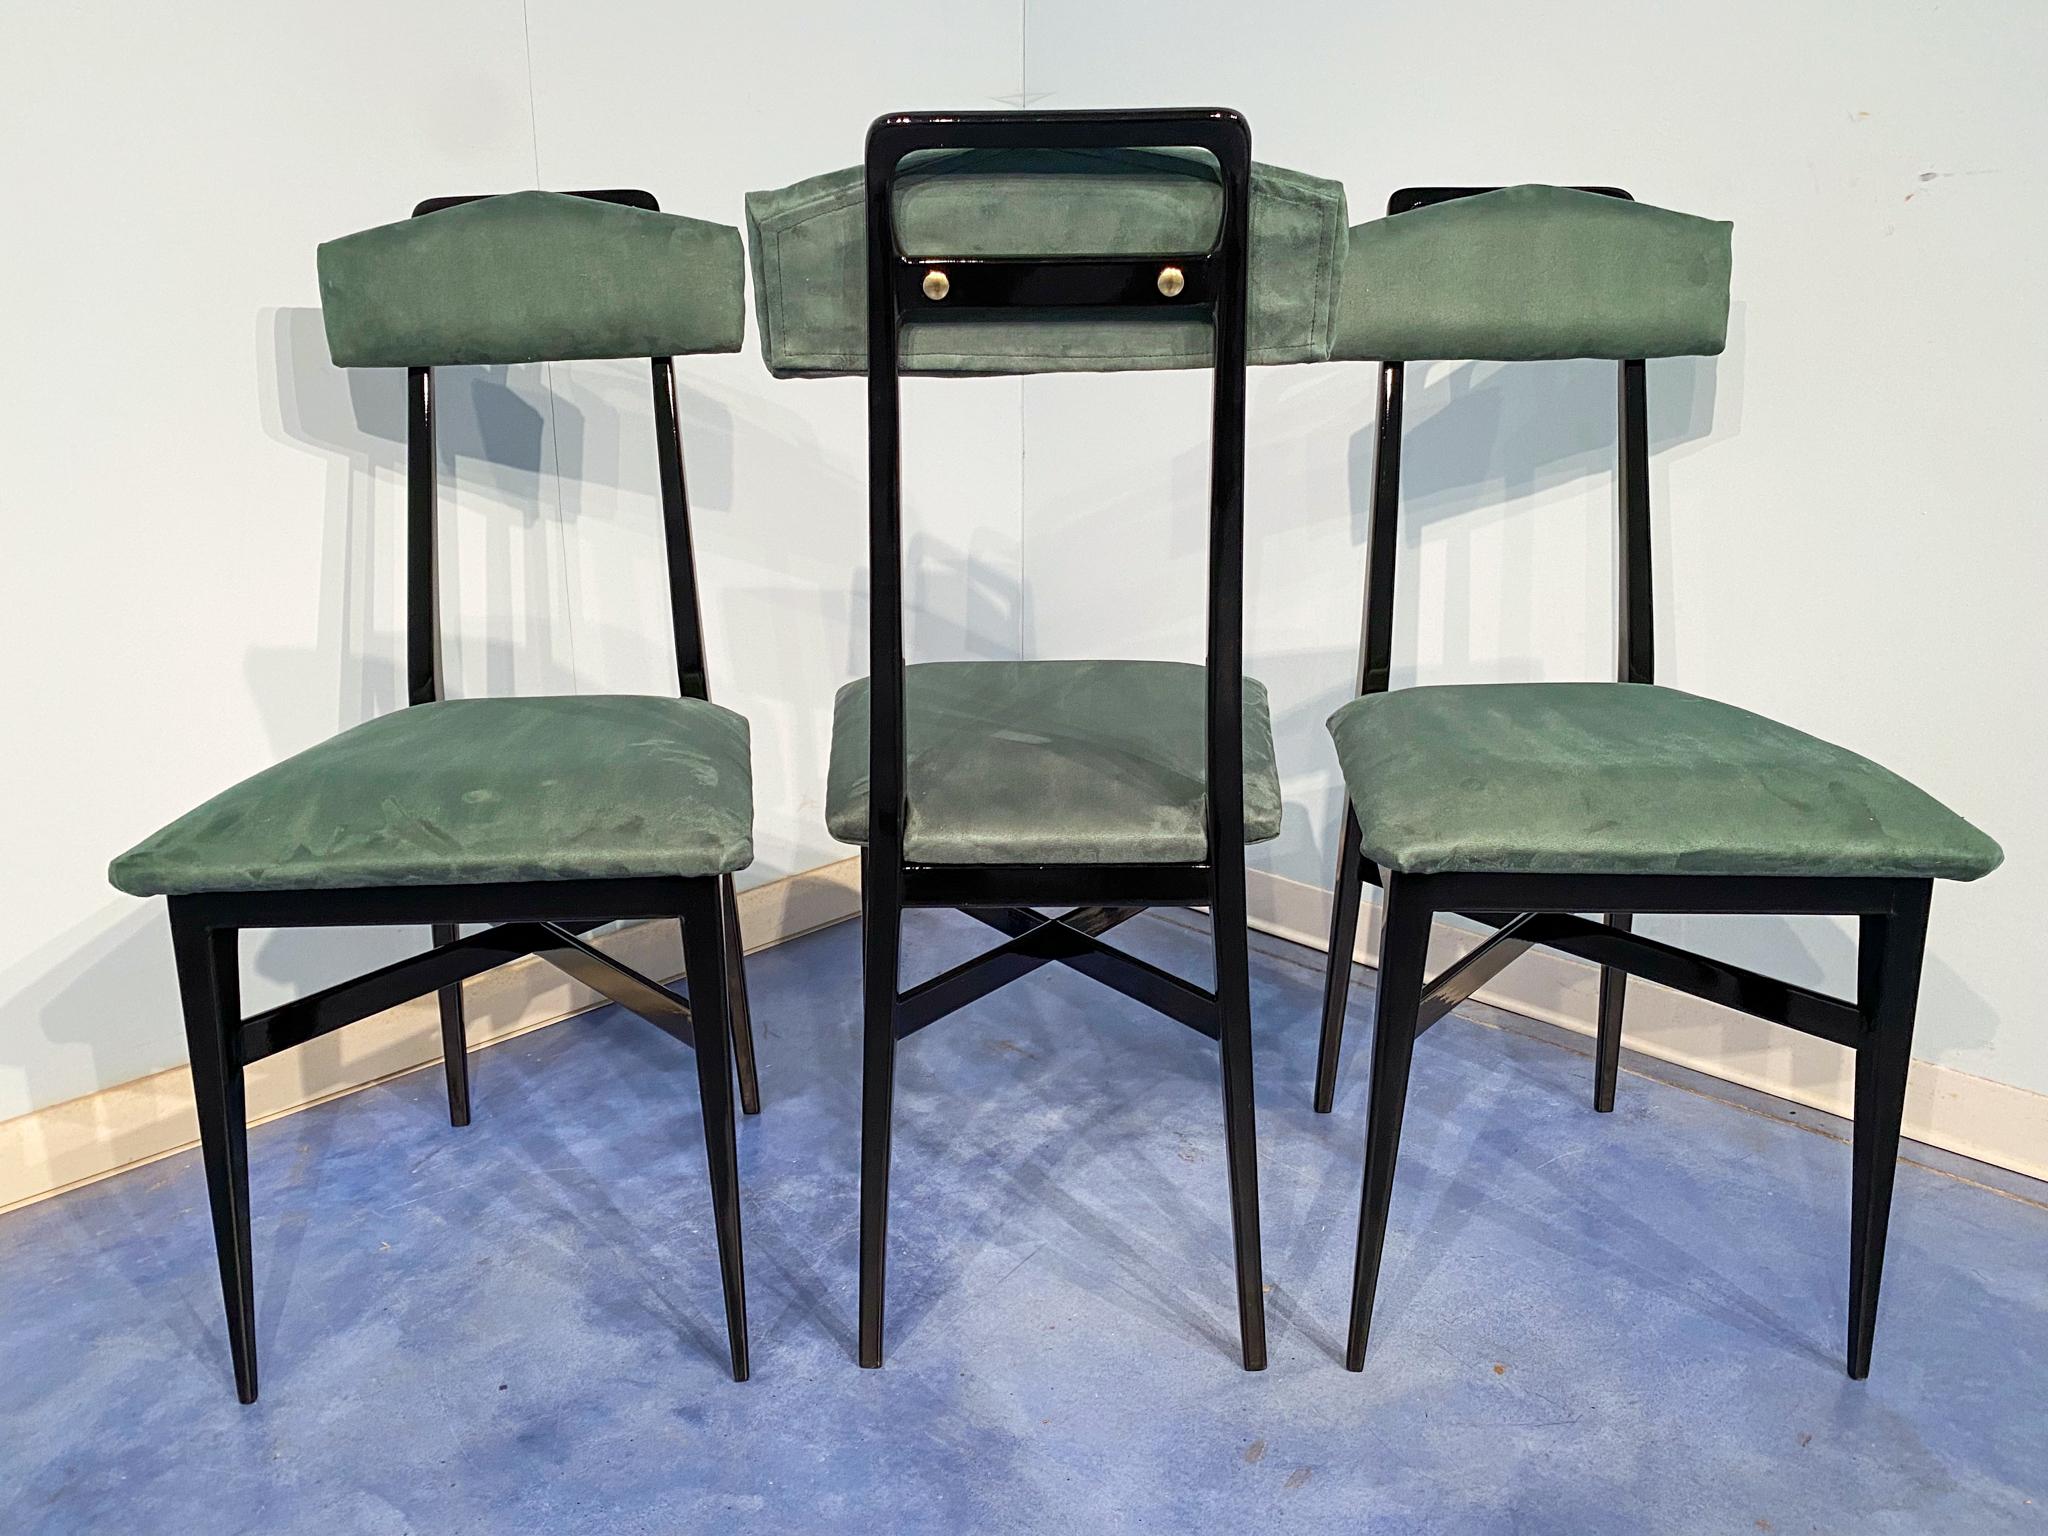 Italian Mid-Century Black and Green Color Dining Chairs, Set of Six, 1950s For Sale 8